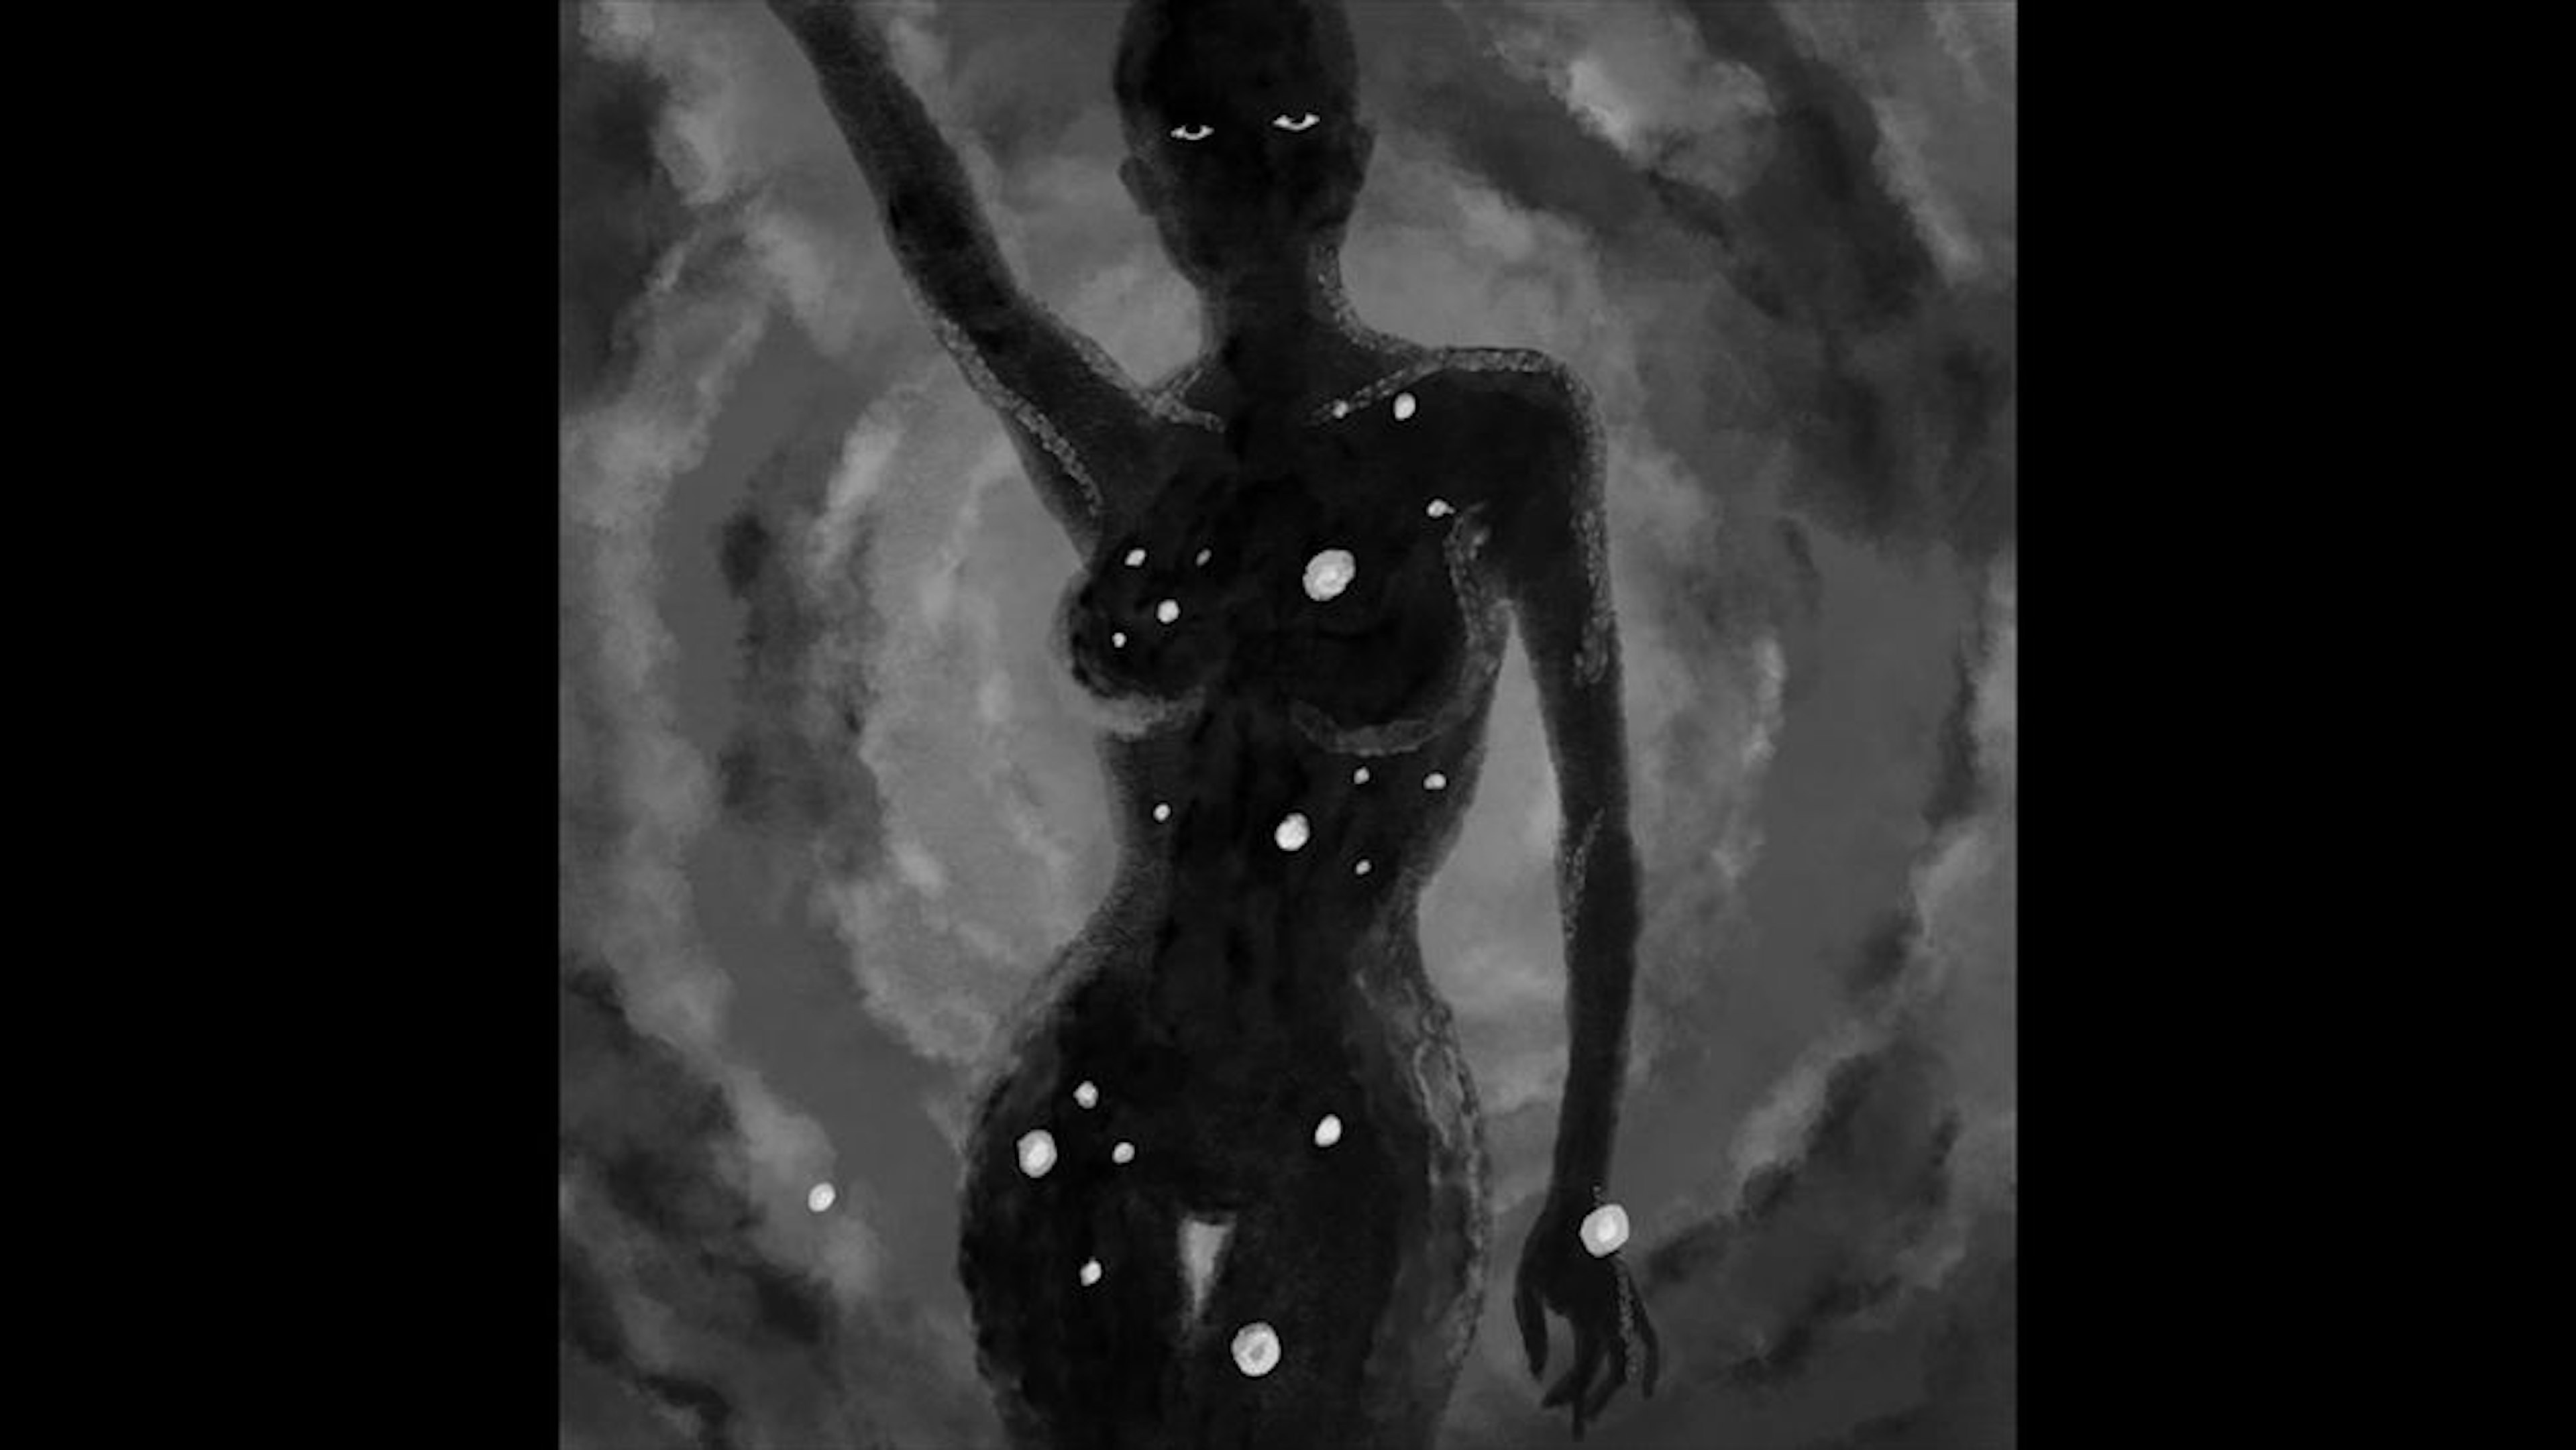 Black and white hand-drawn figure with white spots on the front of their body, their eyes illuminated. They have one arm raised in front of a textured background.